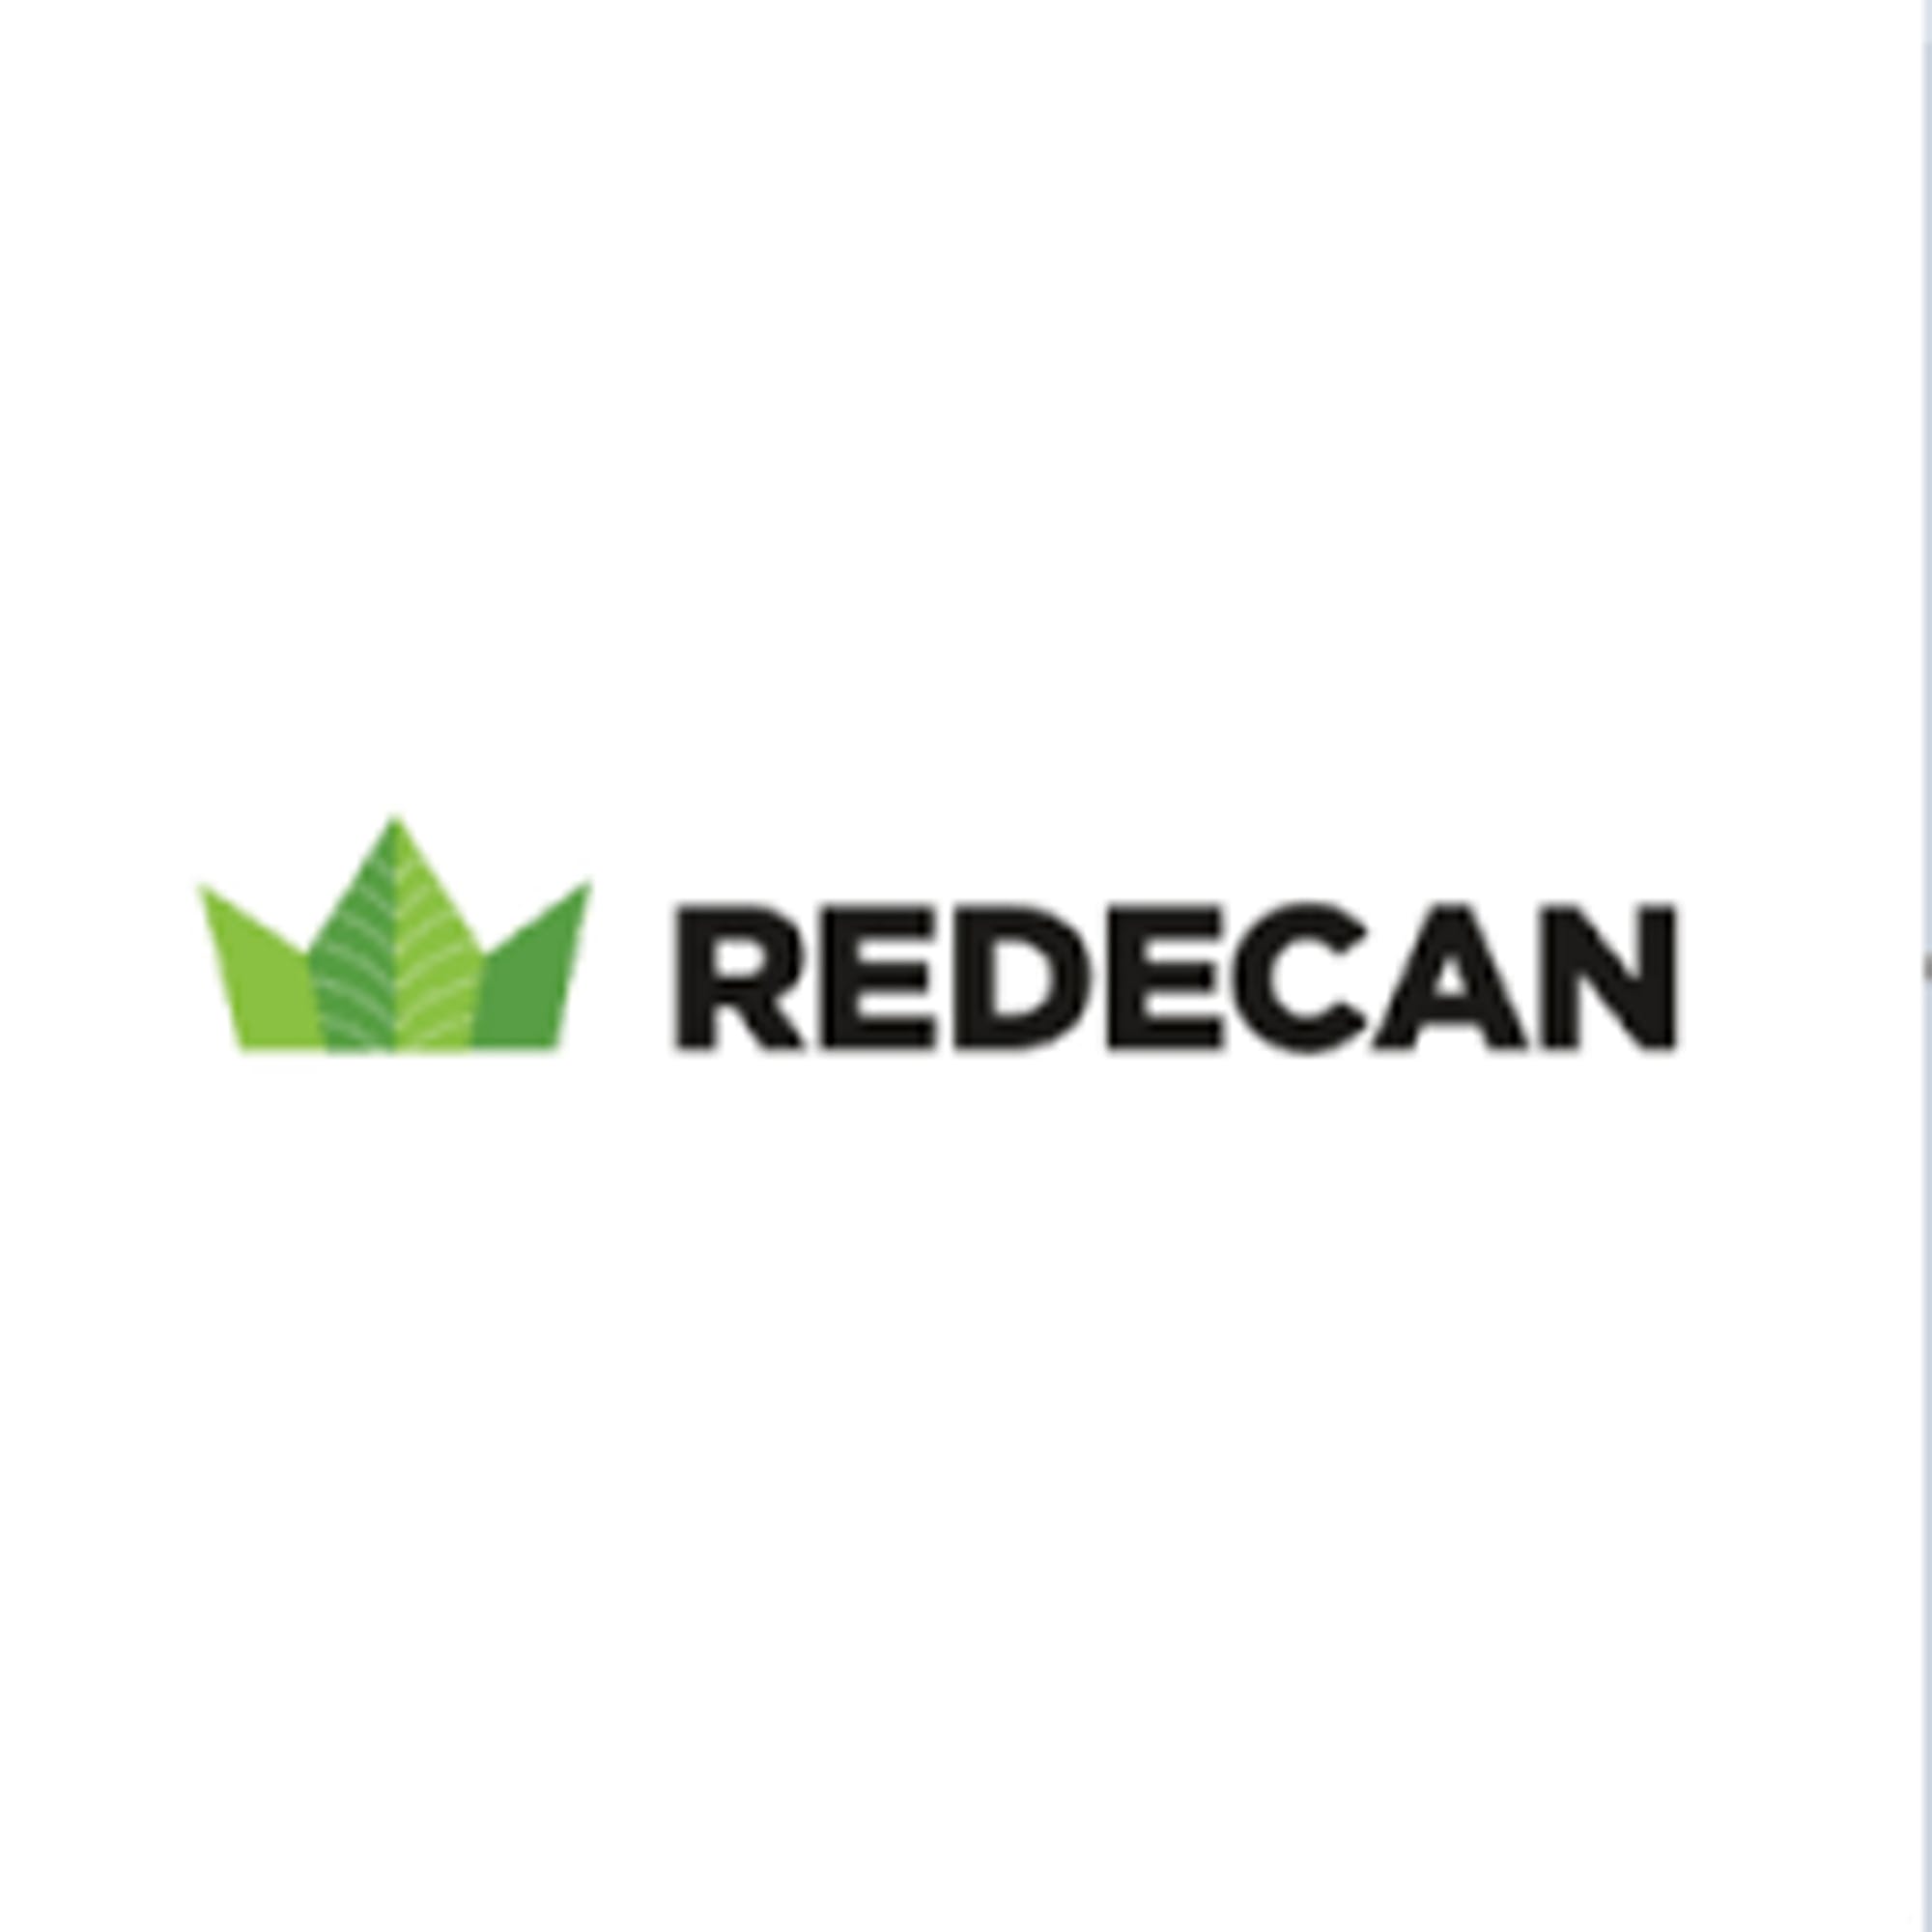 Redecan